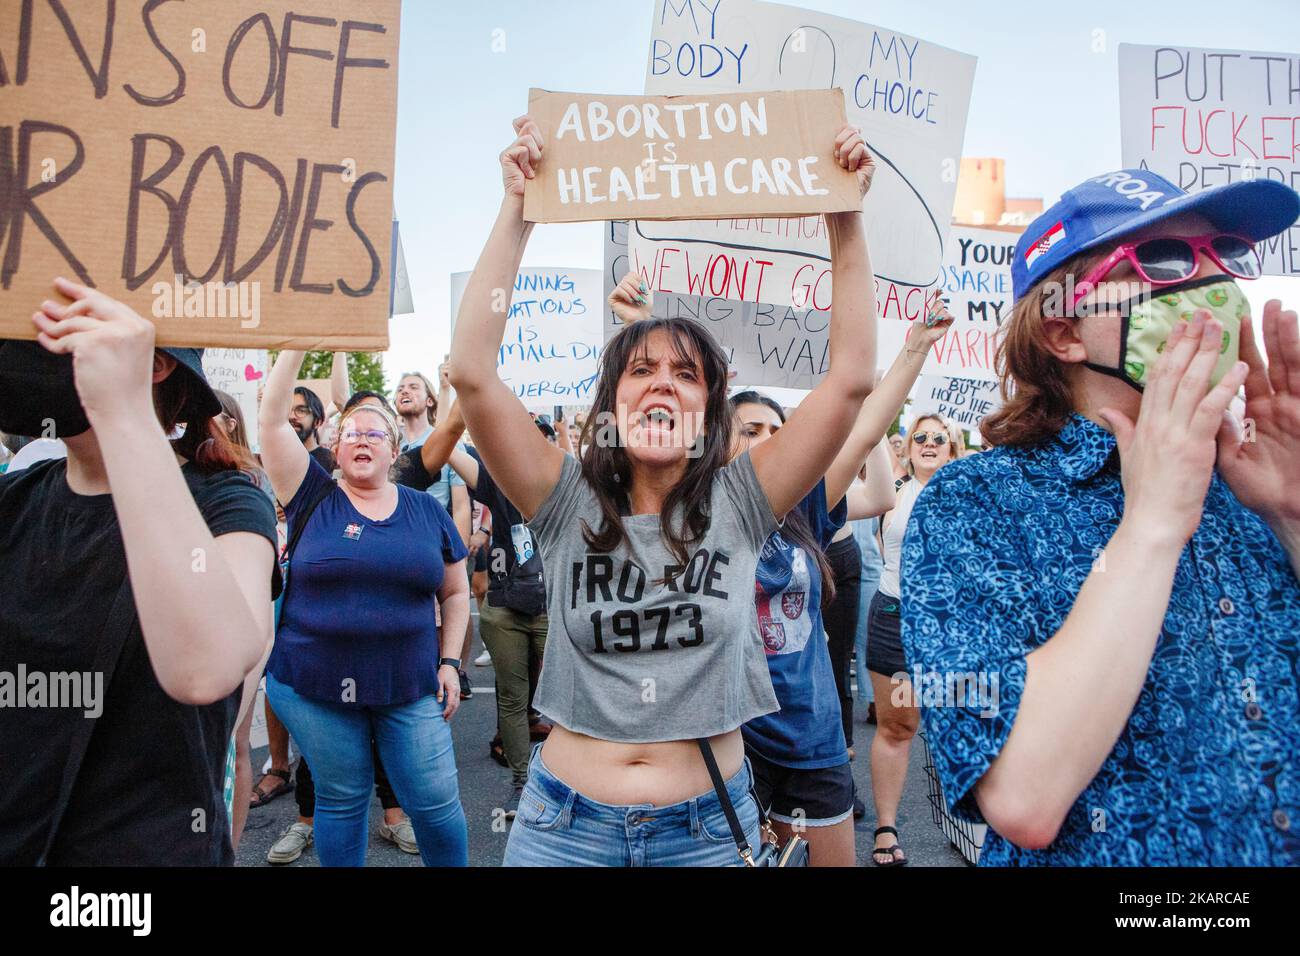 An angry woman stands in crowd holding pro-choice sign at rally Stock Photo